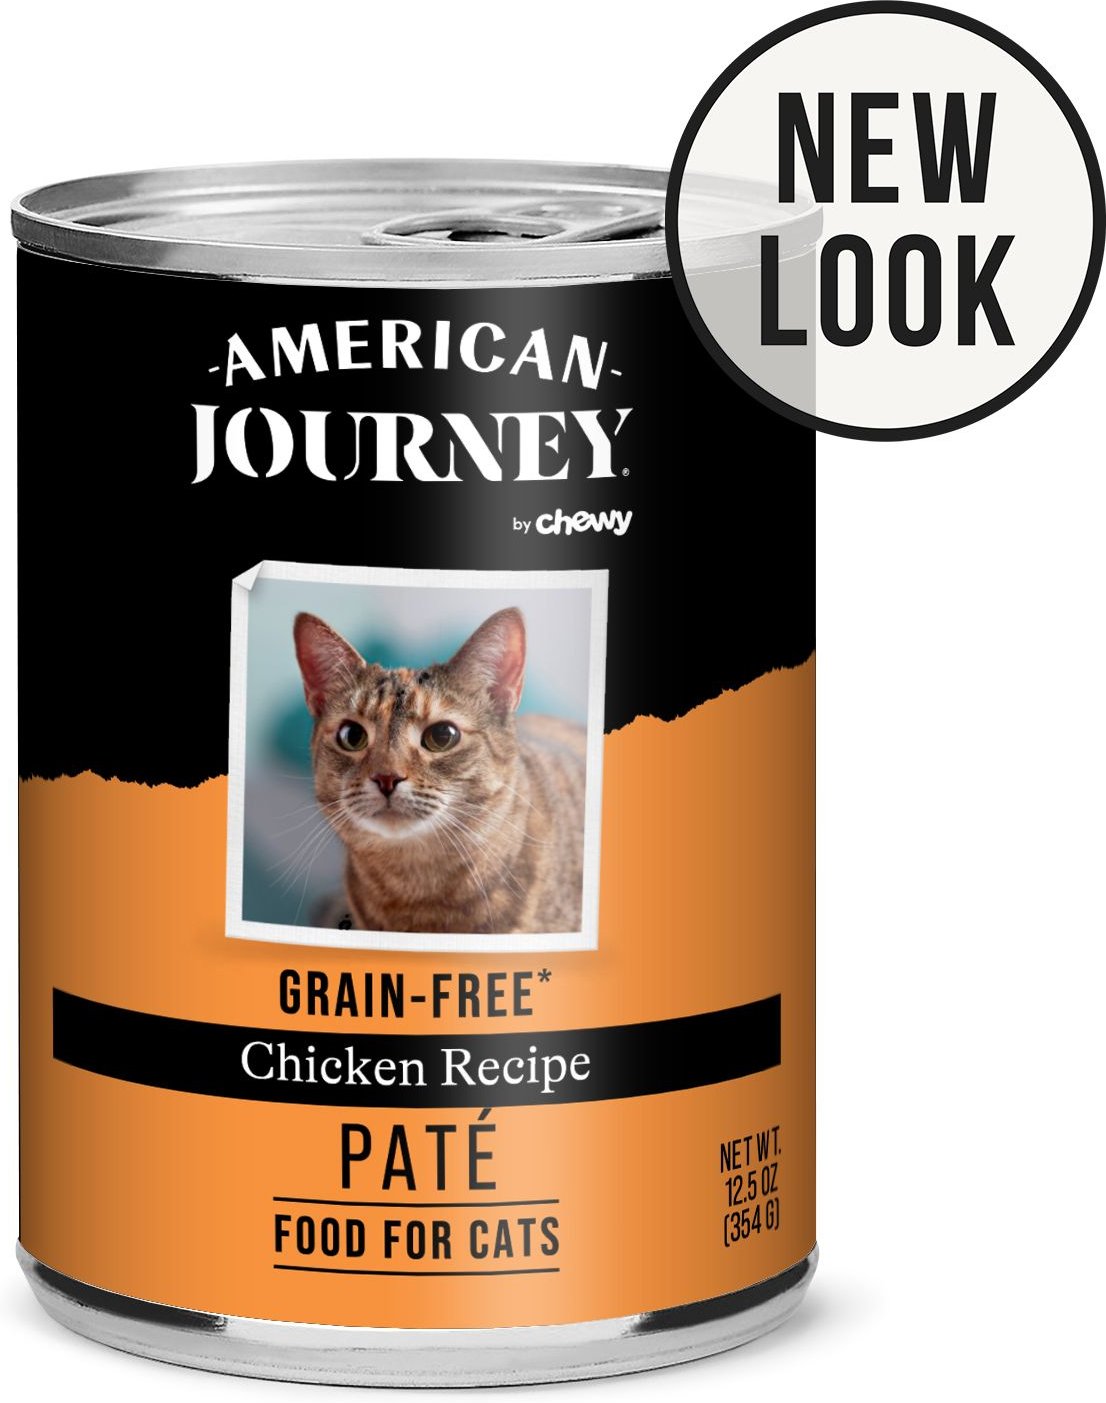 American Journey Pate Chicken Recipe GrainFree Canned Cat Food, 12.5